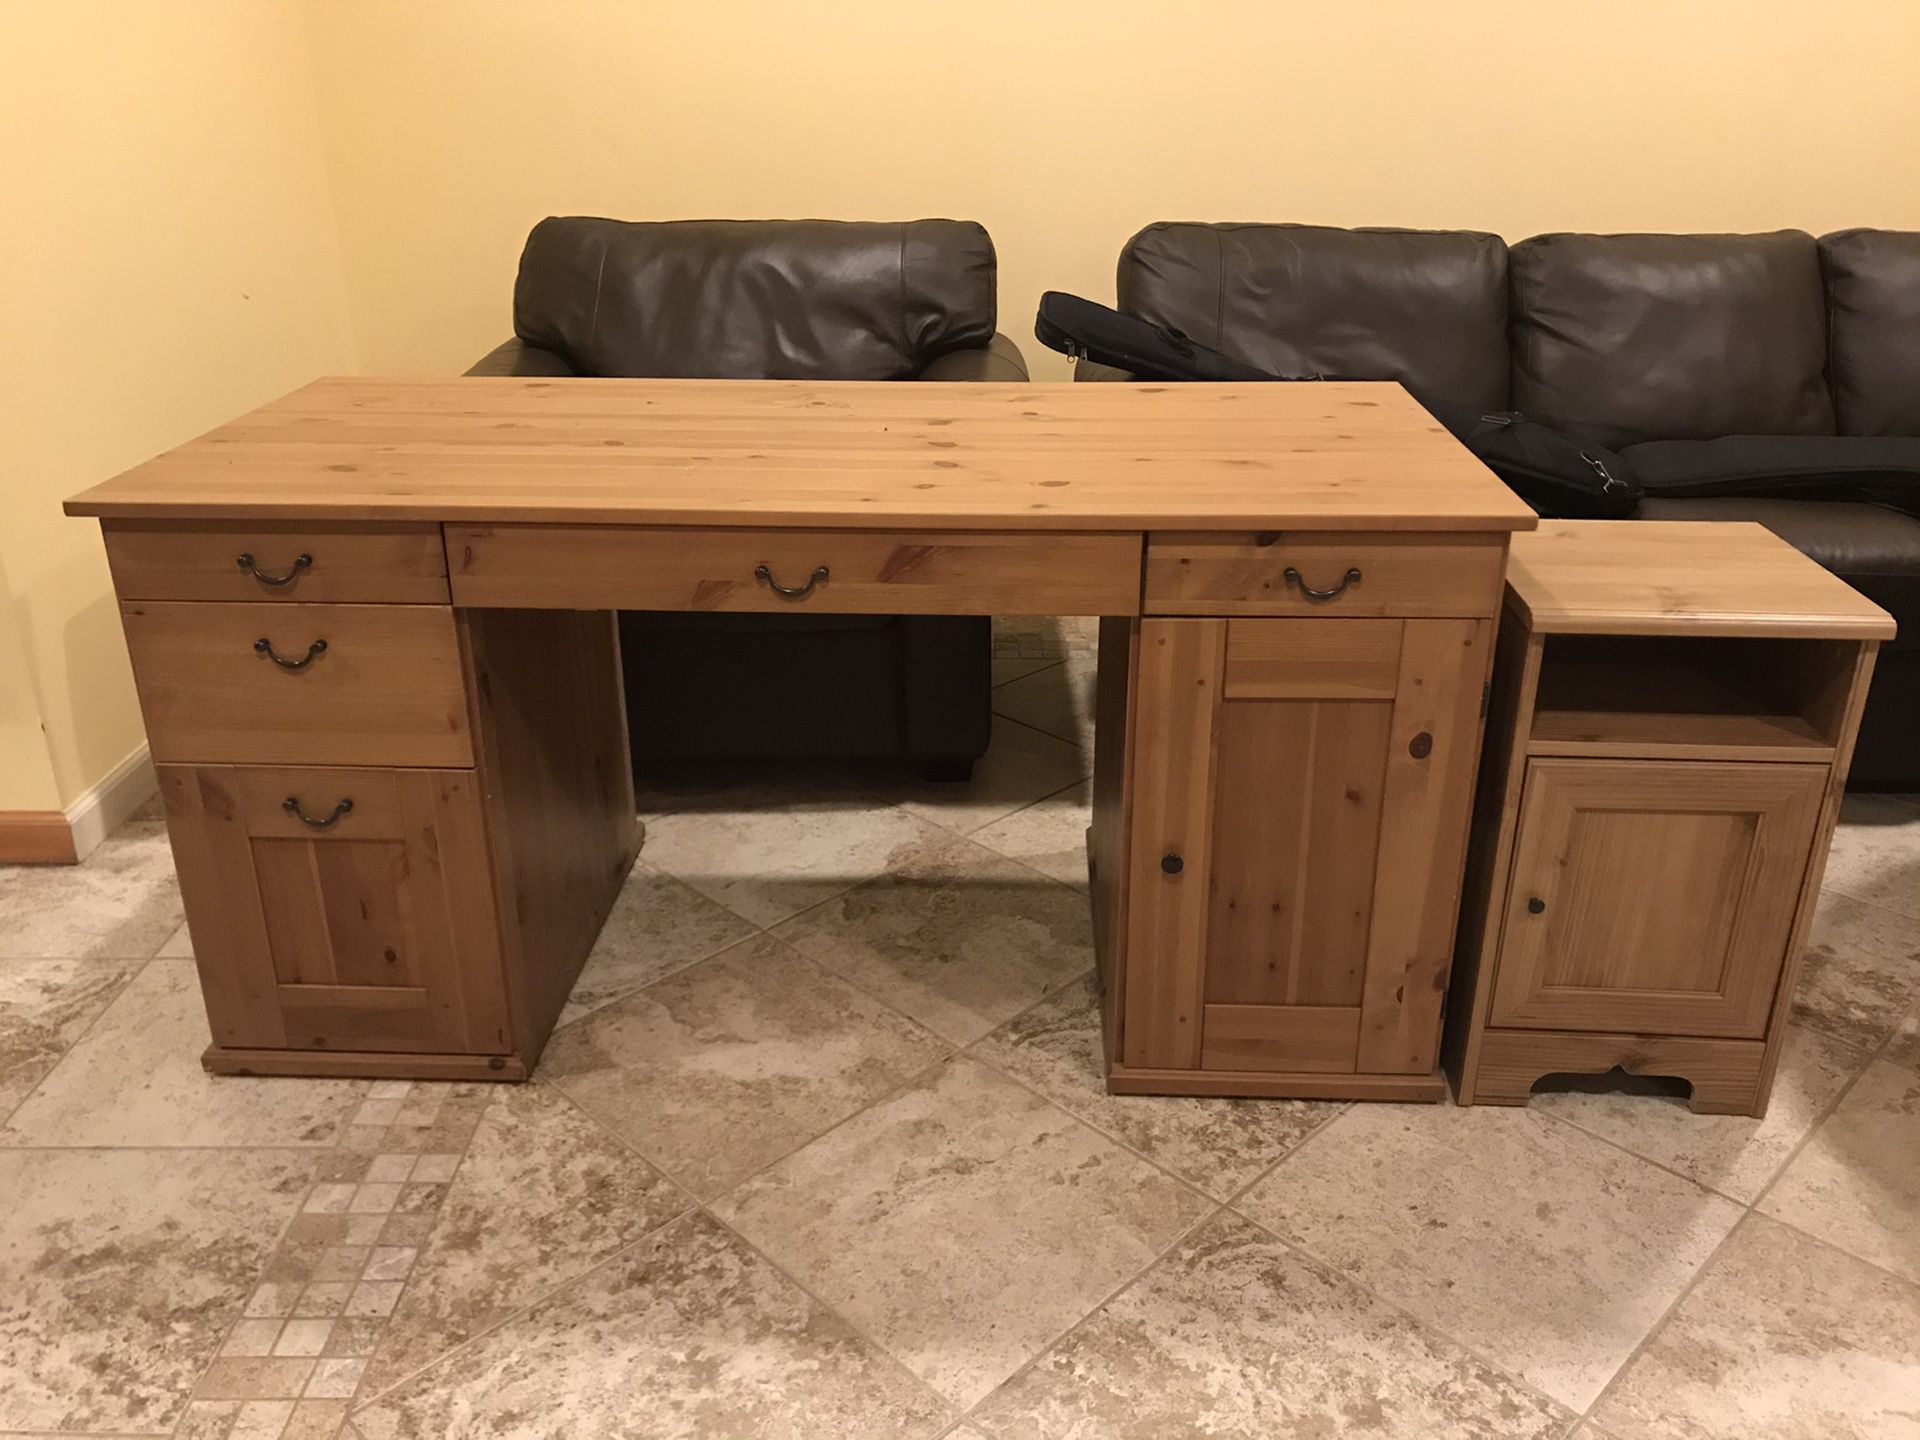 IKEA wooden desk with matching night stand